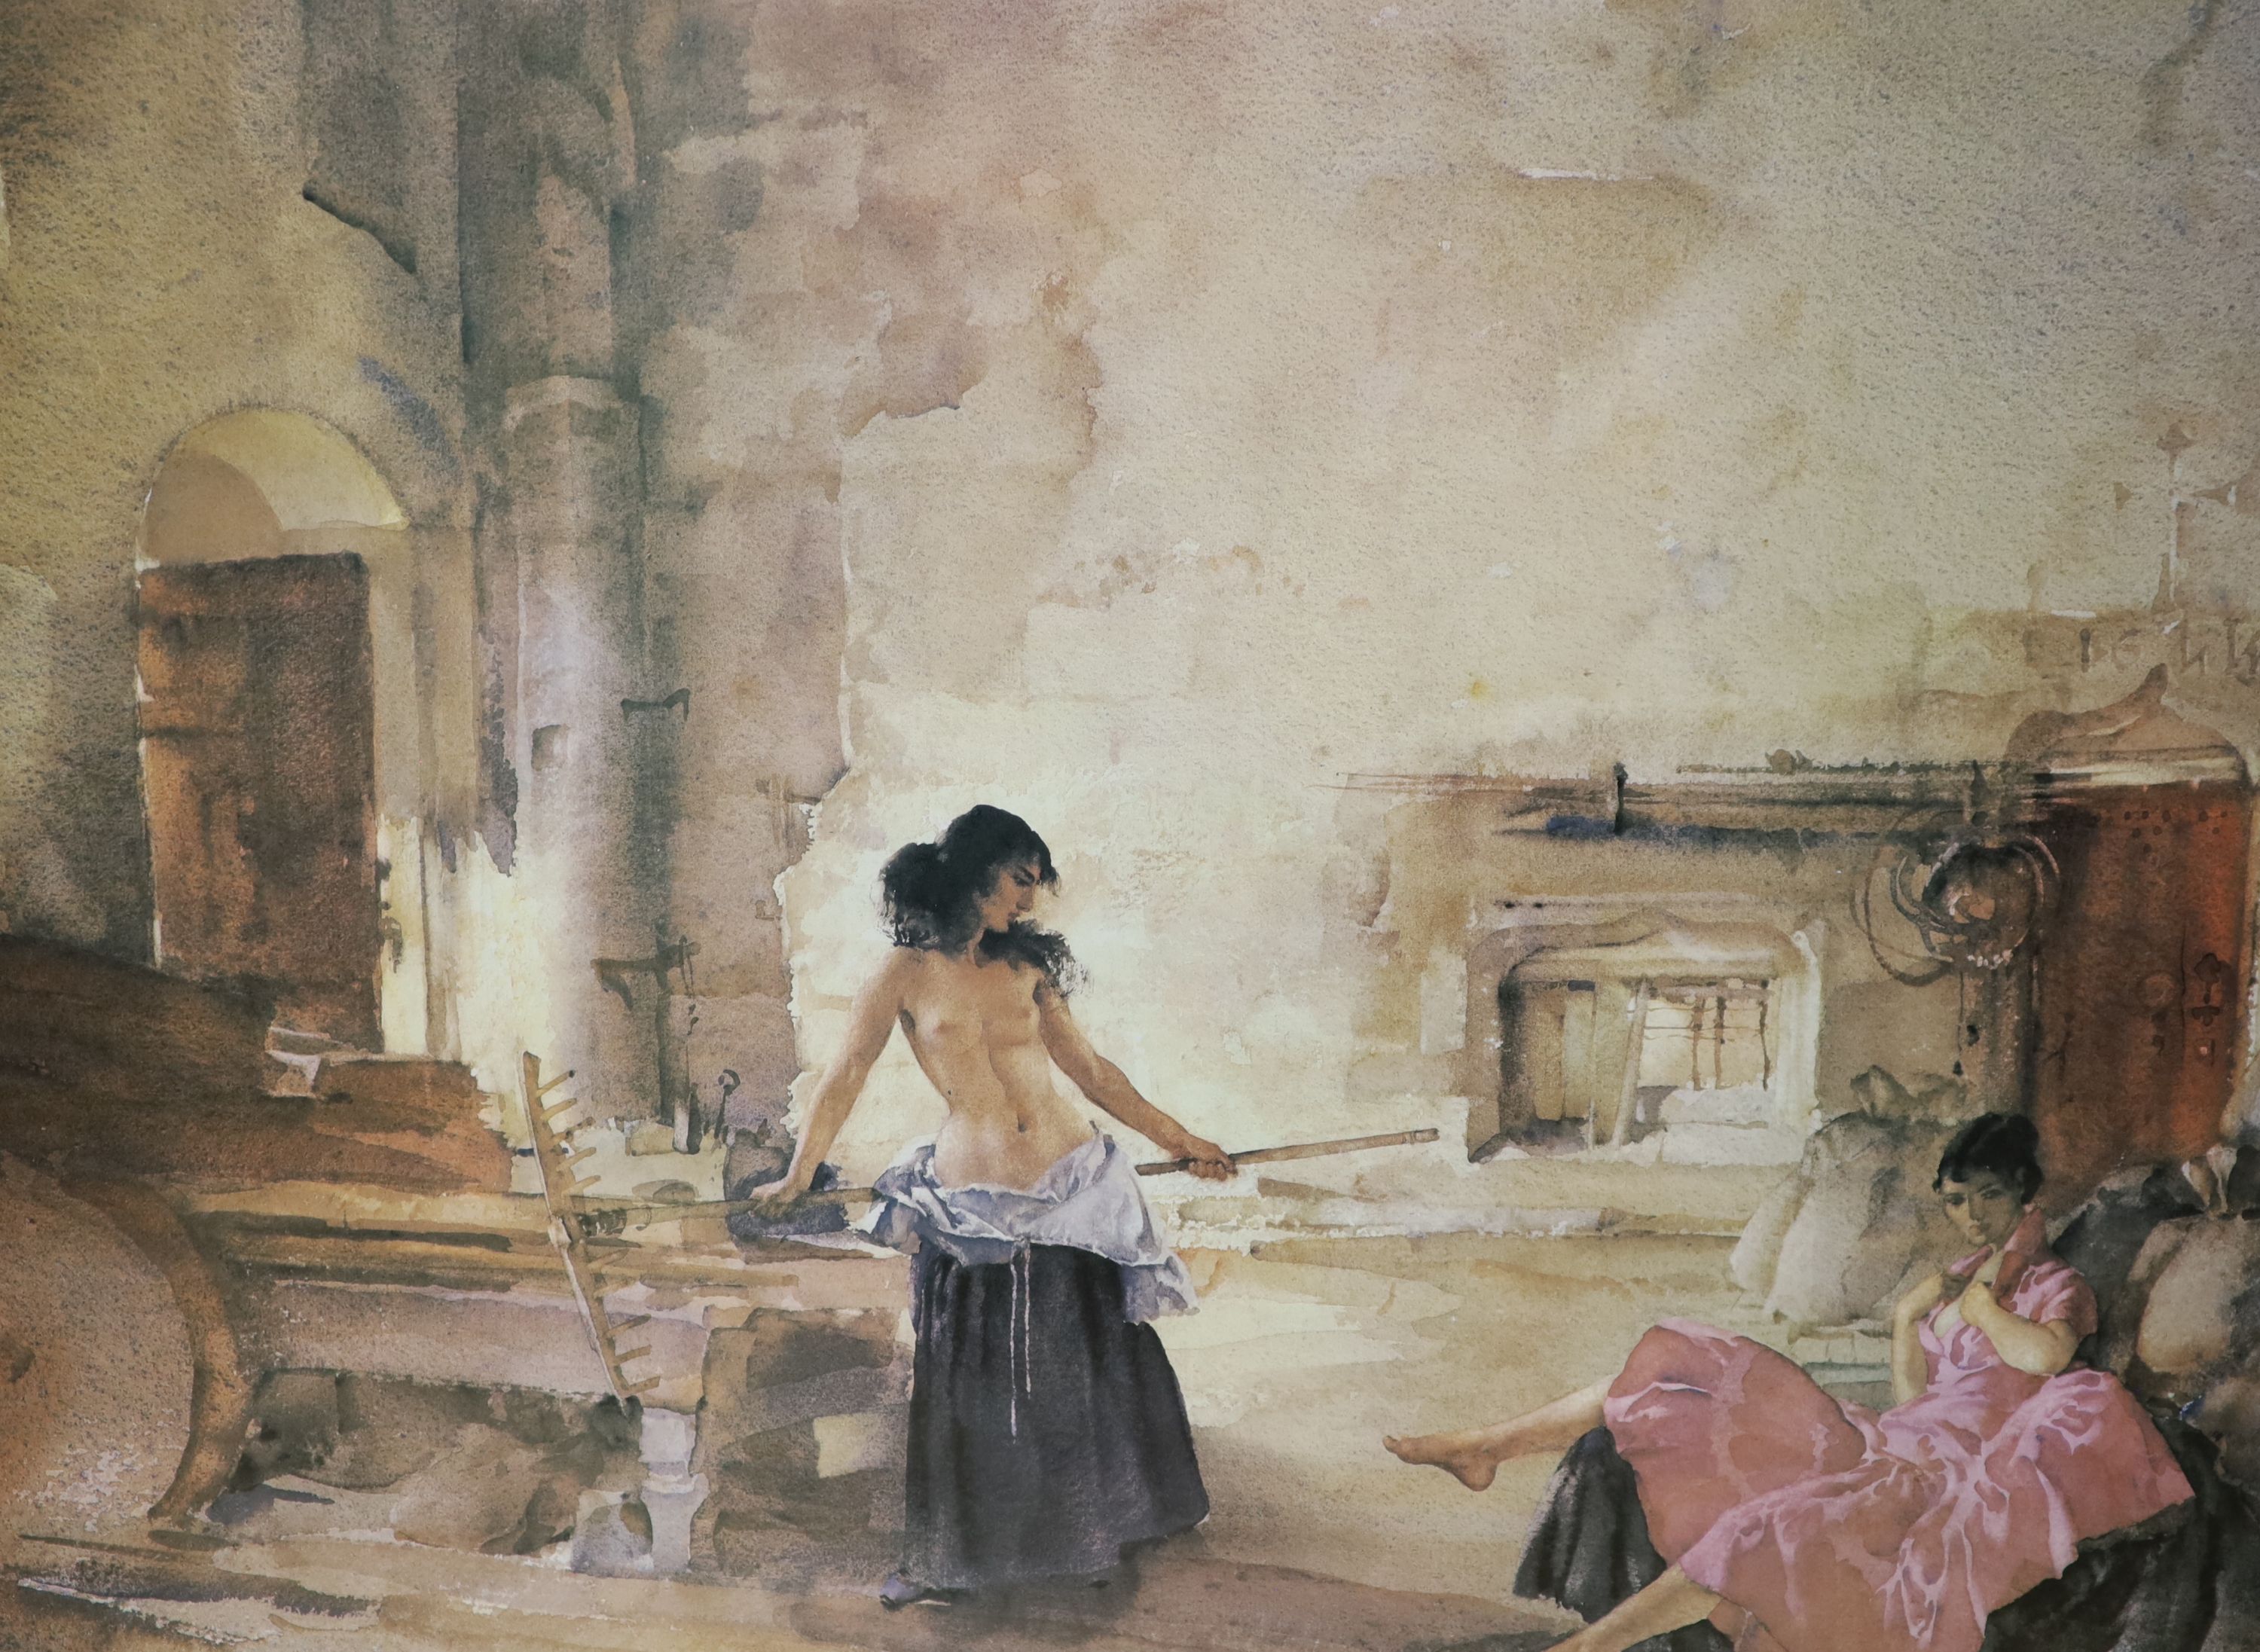 Sir William Russell Flint, limited edition print, Interior with models, 363/850, 52 x 68cm, two other Flint prints and an etching by Samuel Chamberlain